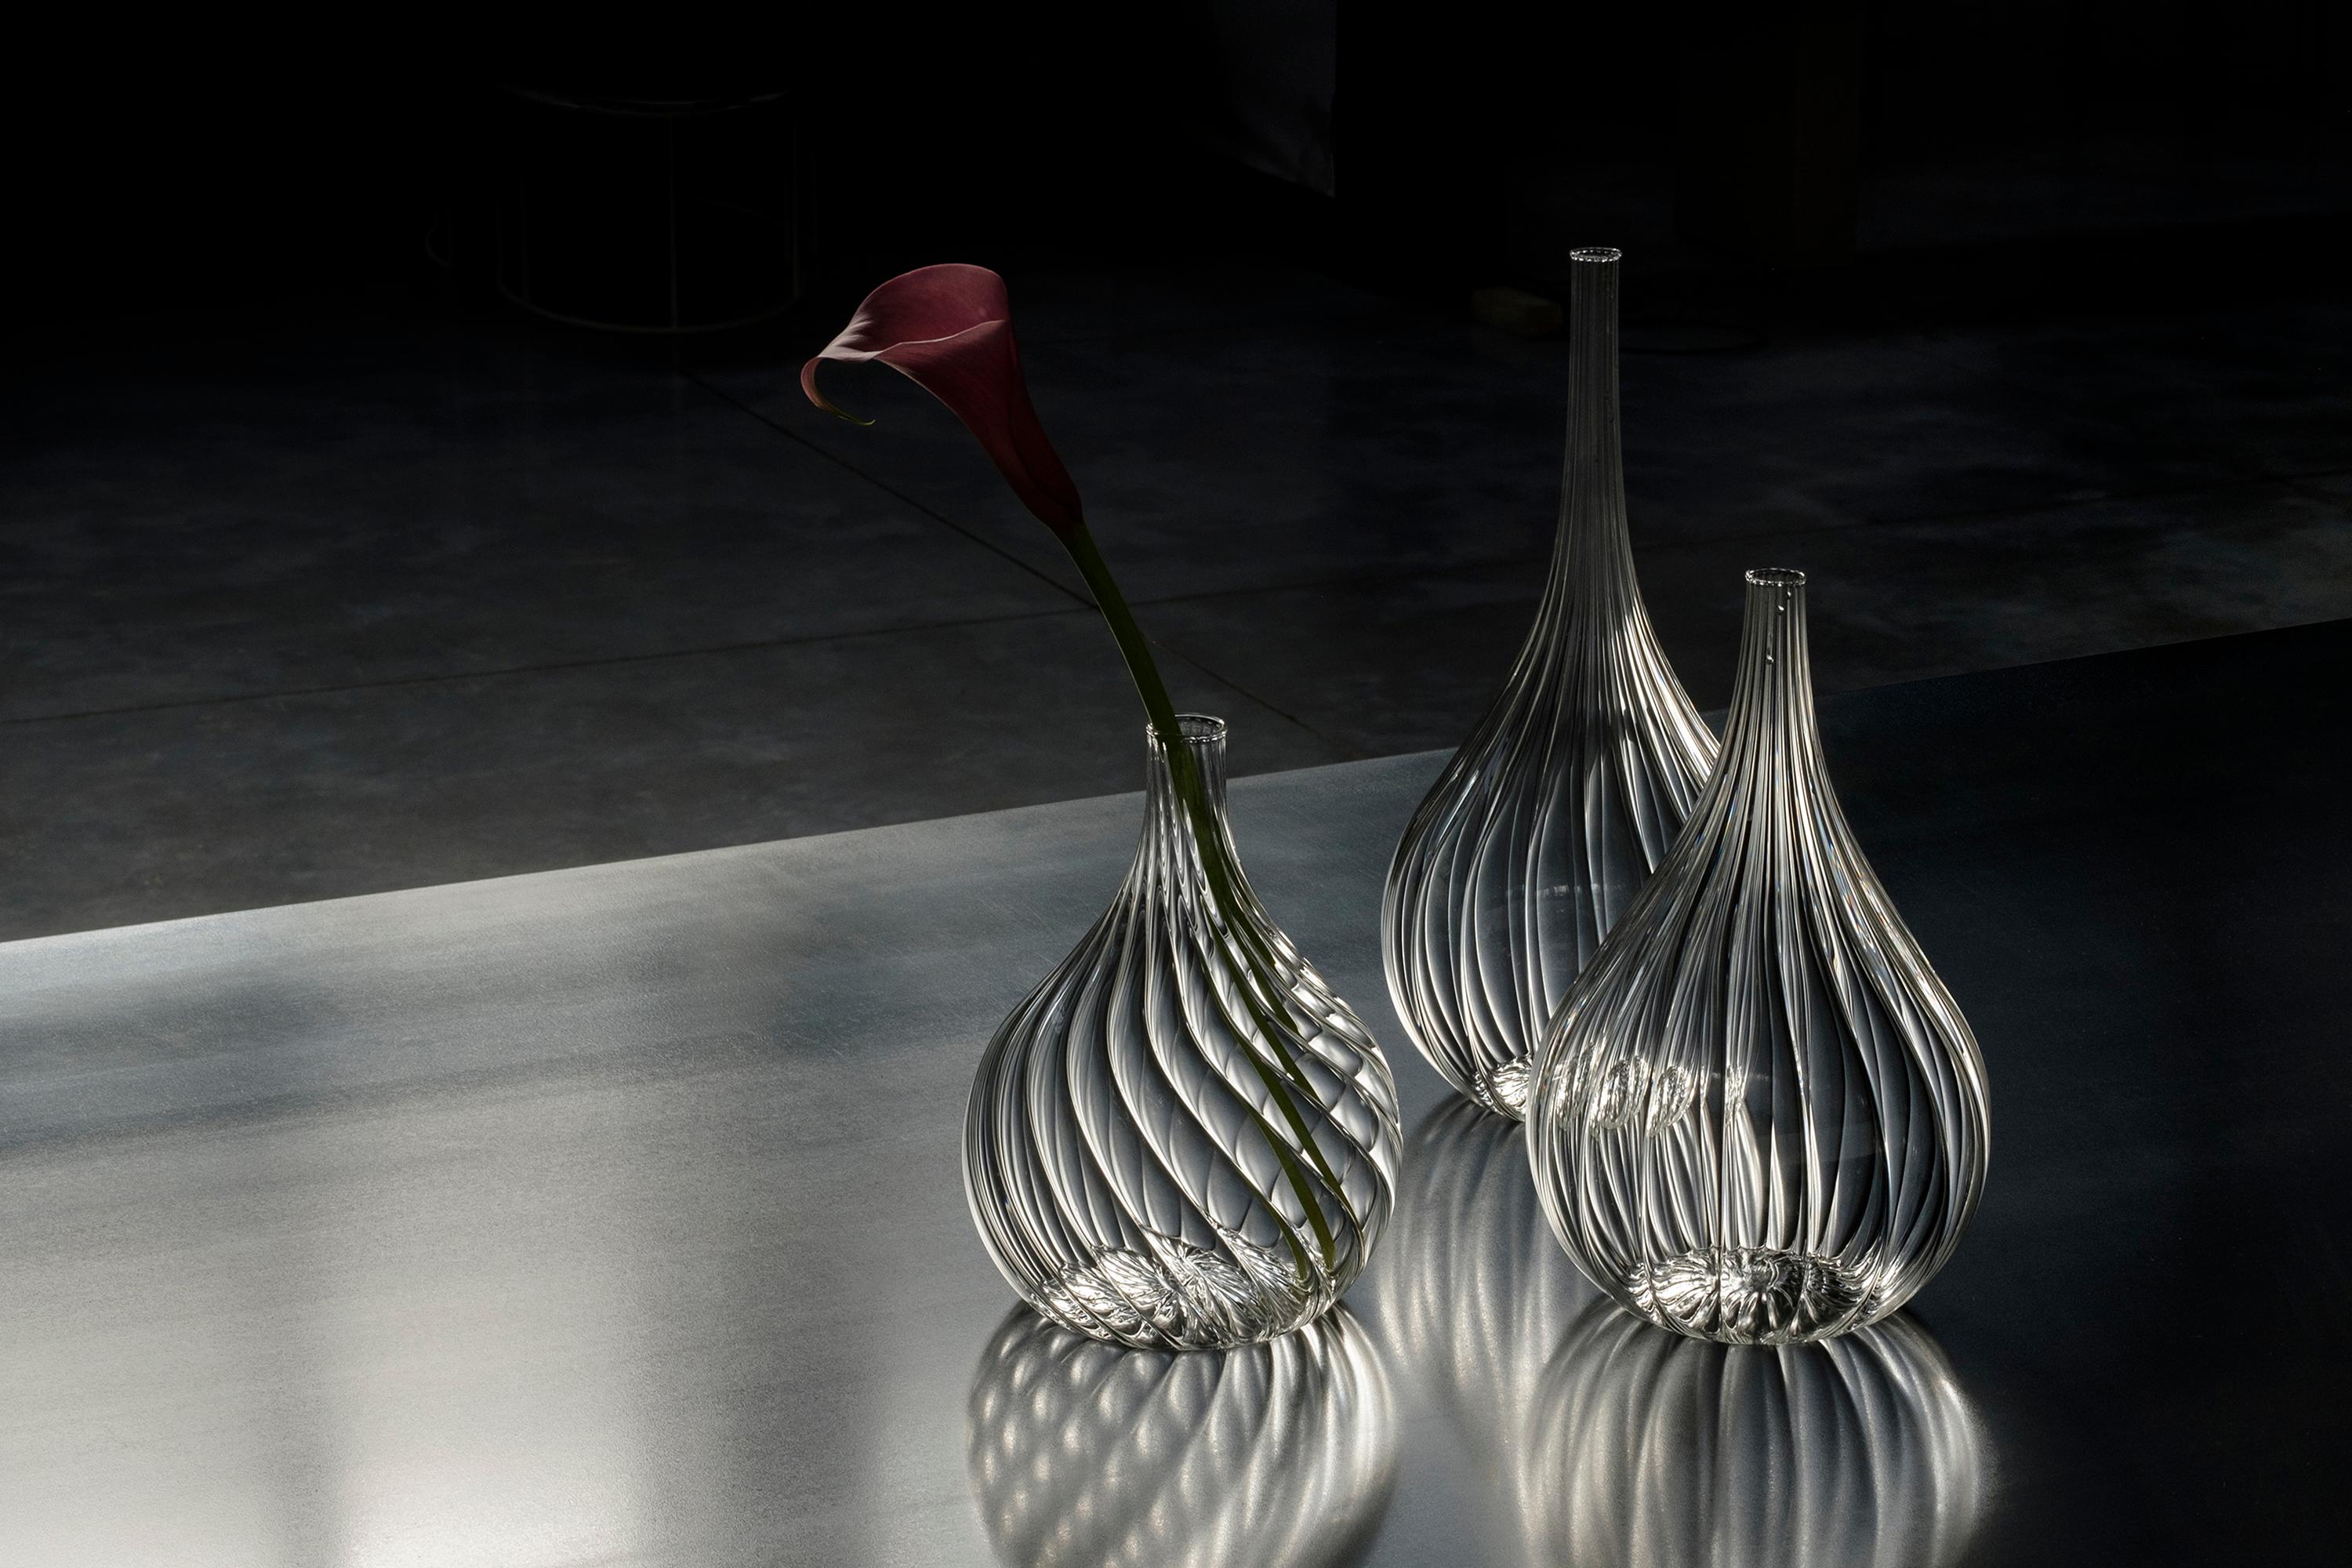 Lukovki is a set of three vases inspired by the tops of St. Basil’s Cathedral on Moscow’s Red Square. Made of striped borosilicate, the alternation of texture in the three pieces makes them dynamic and light. Lukovki vase set is designed by Design